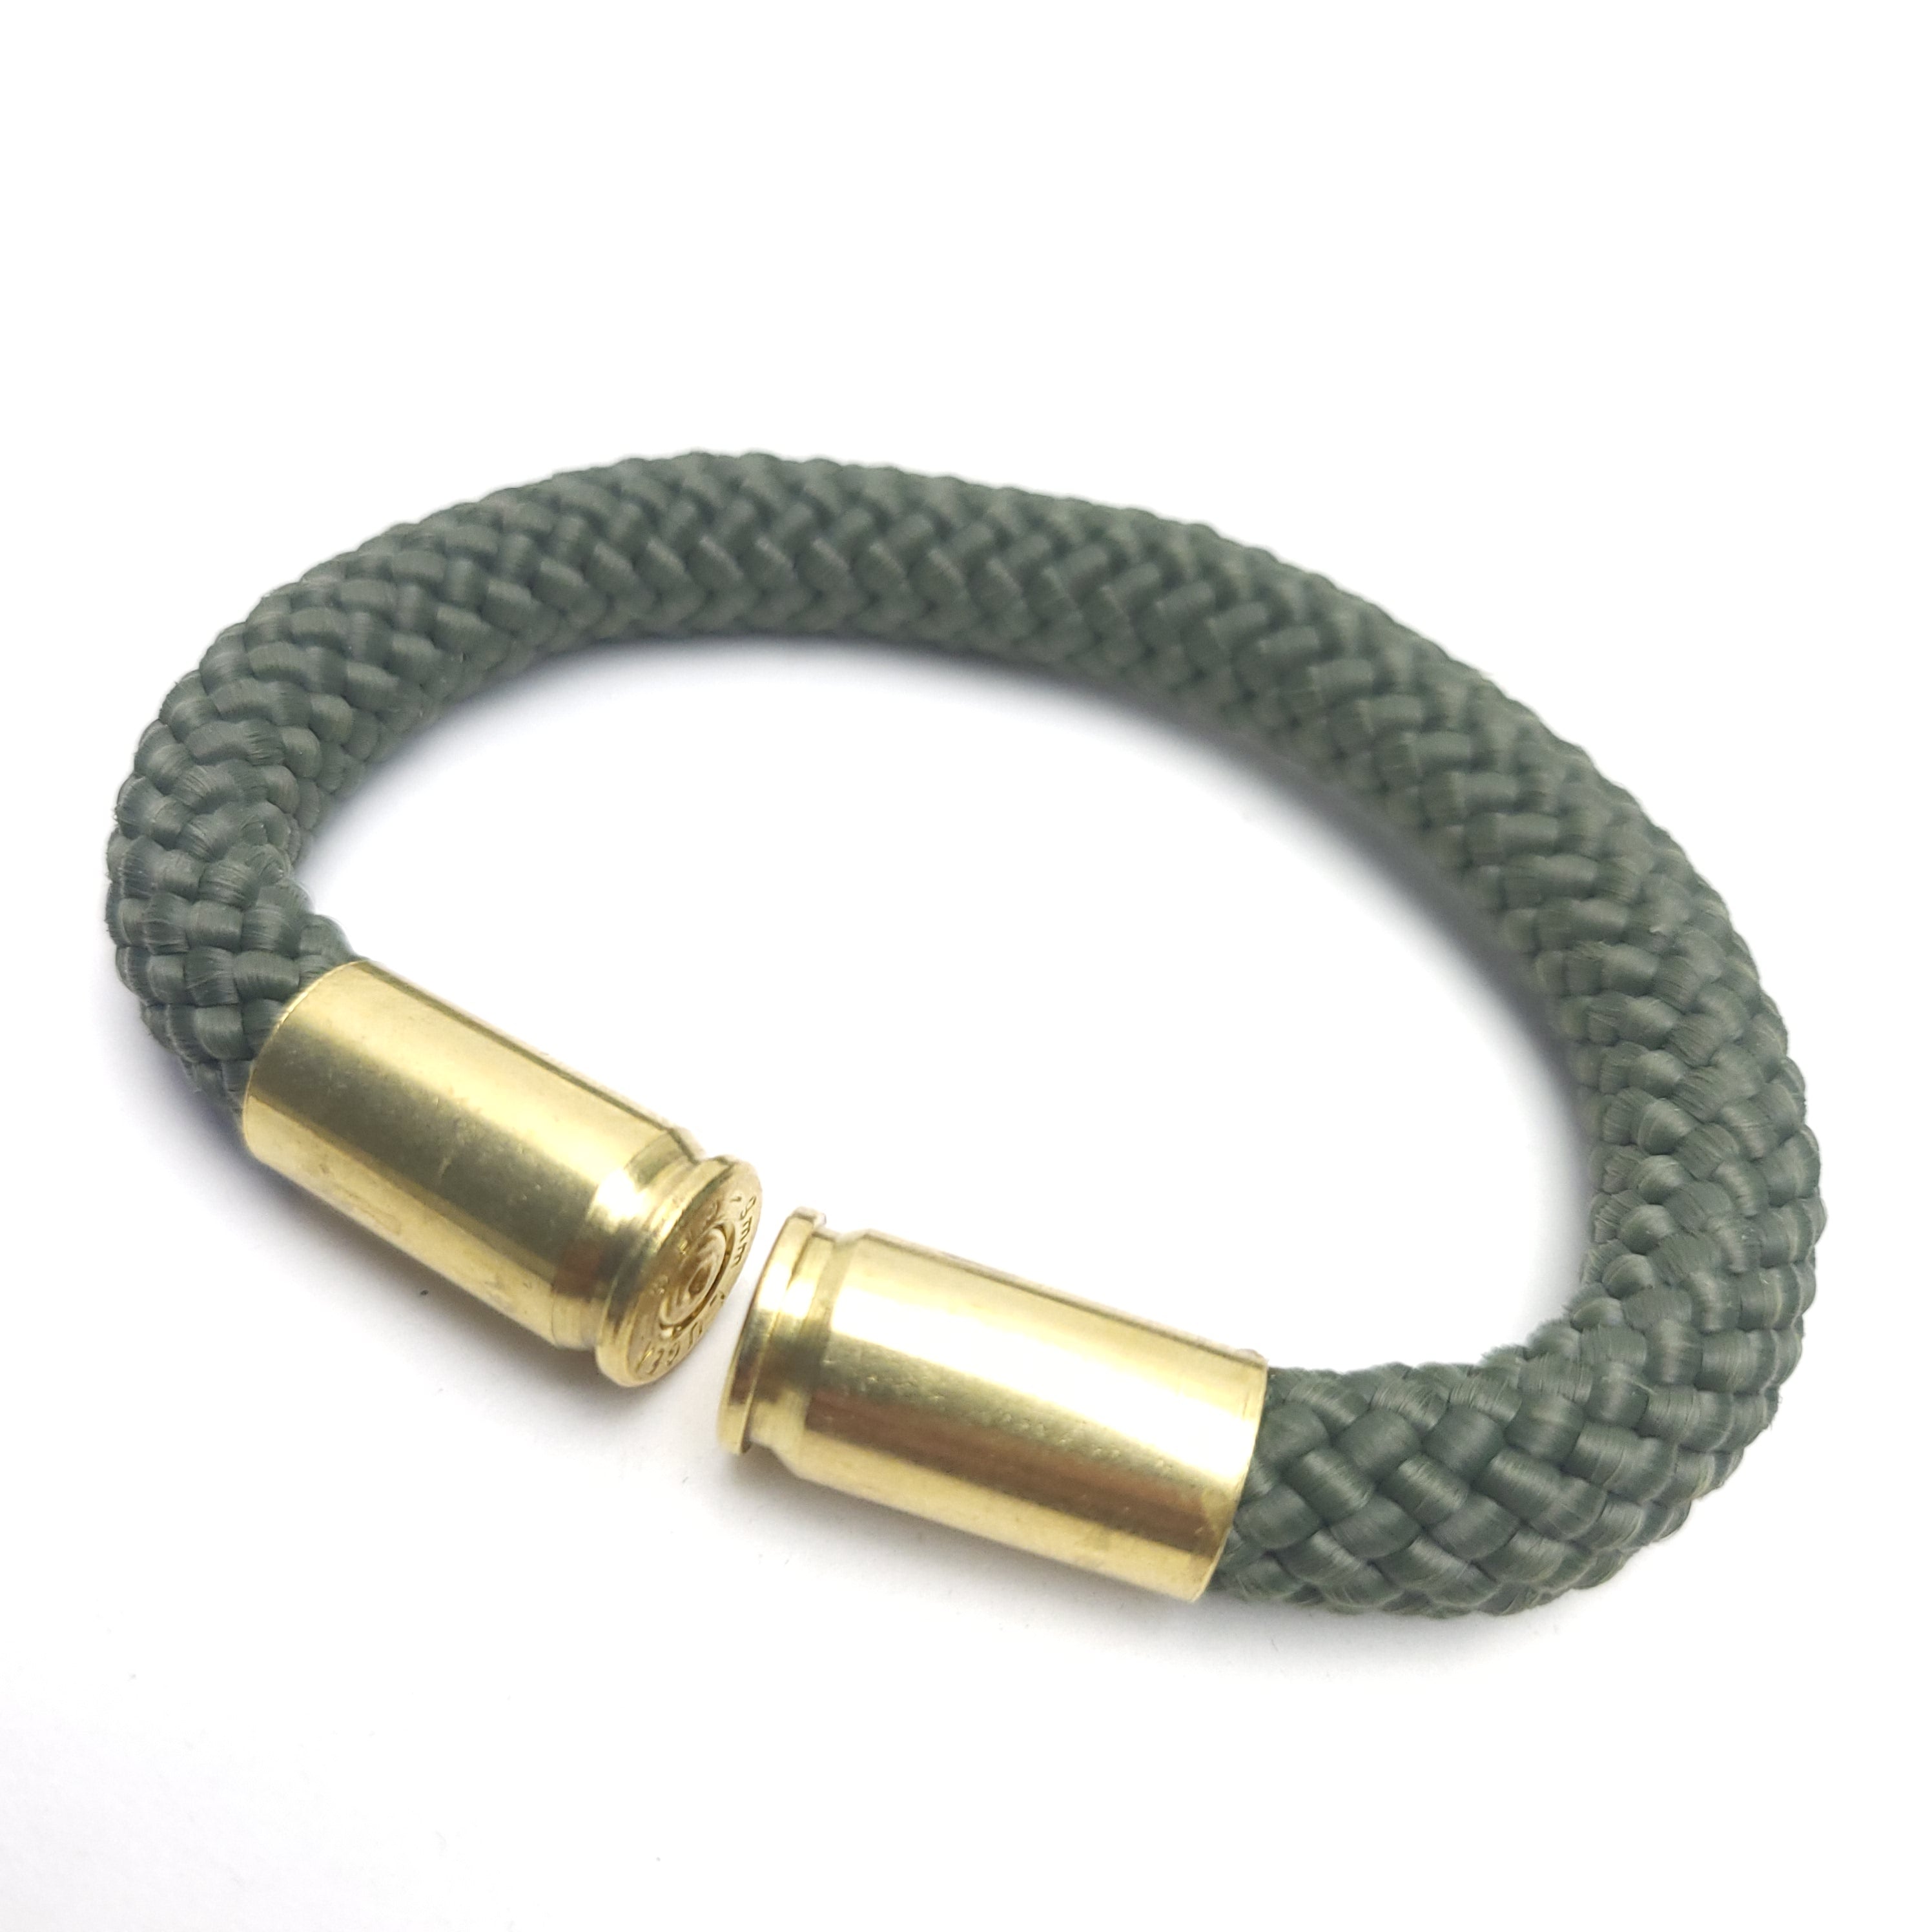 OD Green 9mm BearArms Bullet Bracelet for Crystal of New Jersey